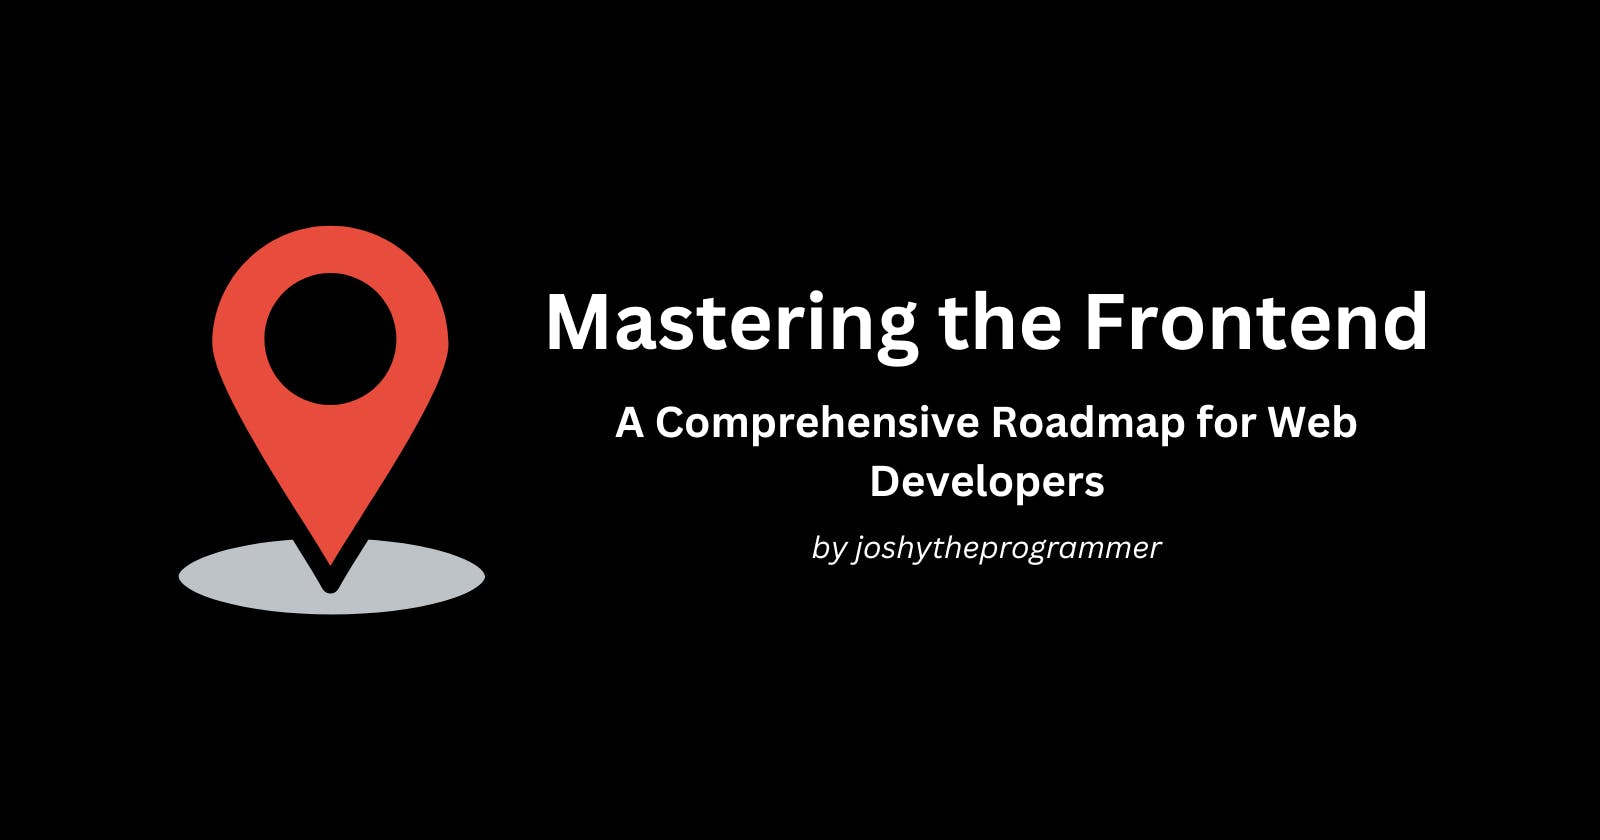 Mastering the Frontend: A Comprehensive Roadmap for Web Developers